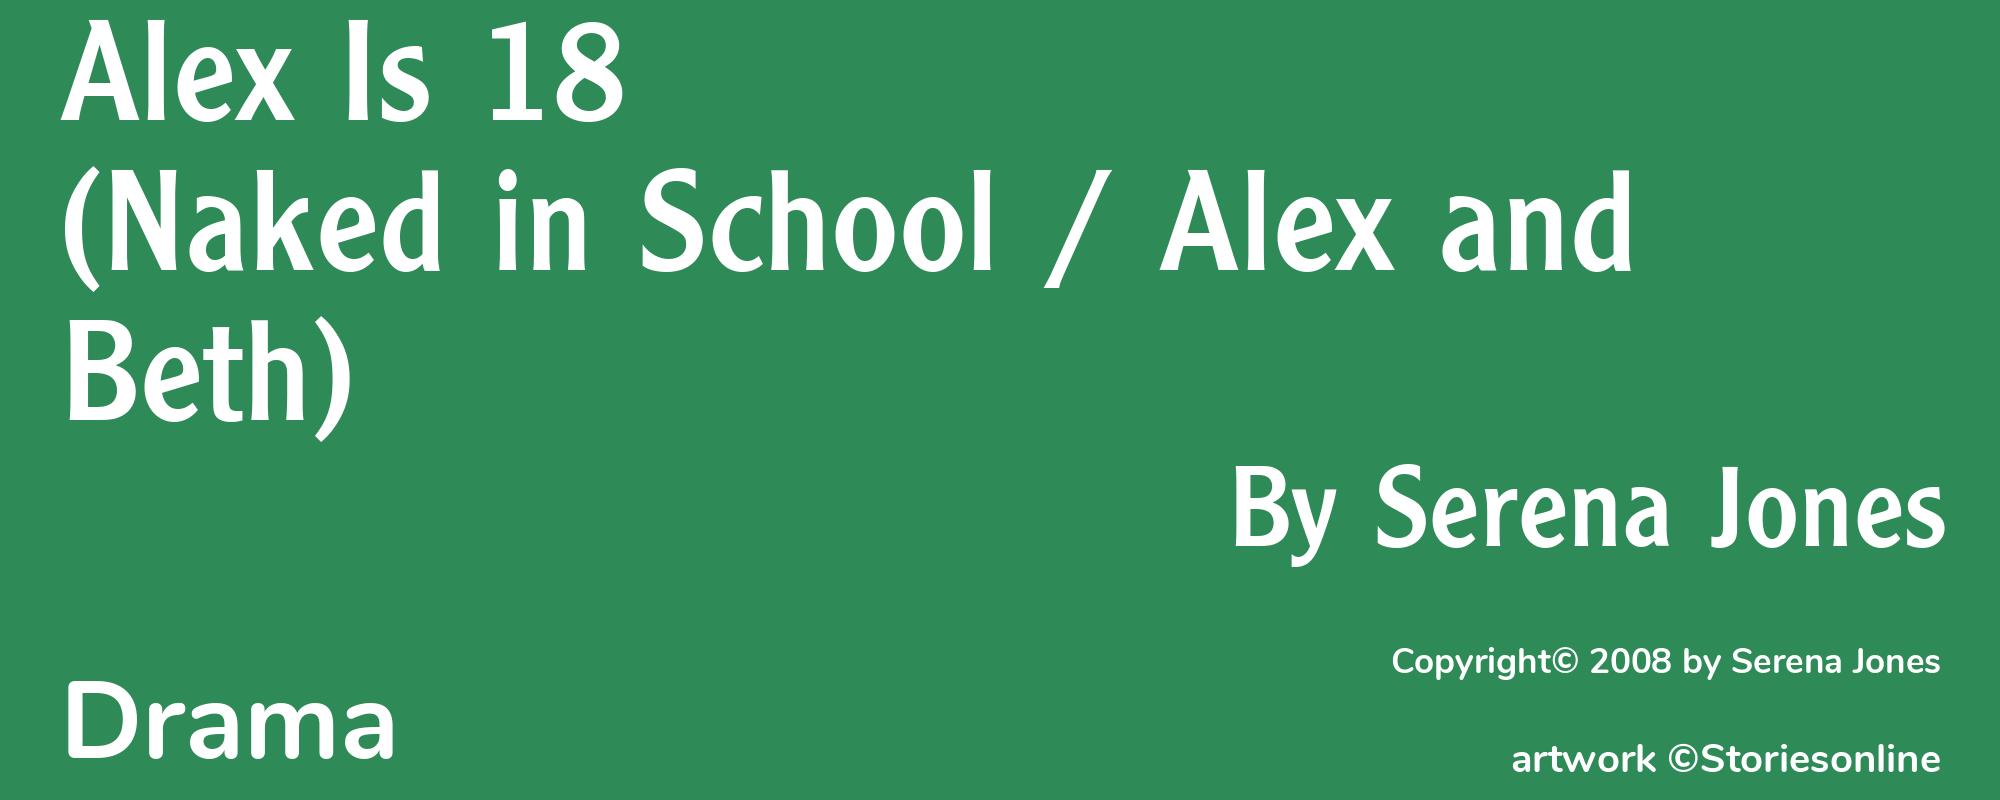 Alex Is 18 (Naked in School / Alex and Beth) - Cover